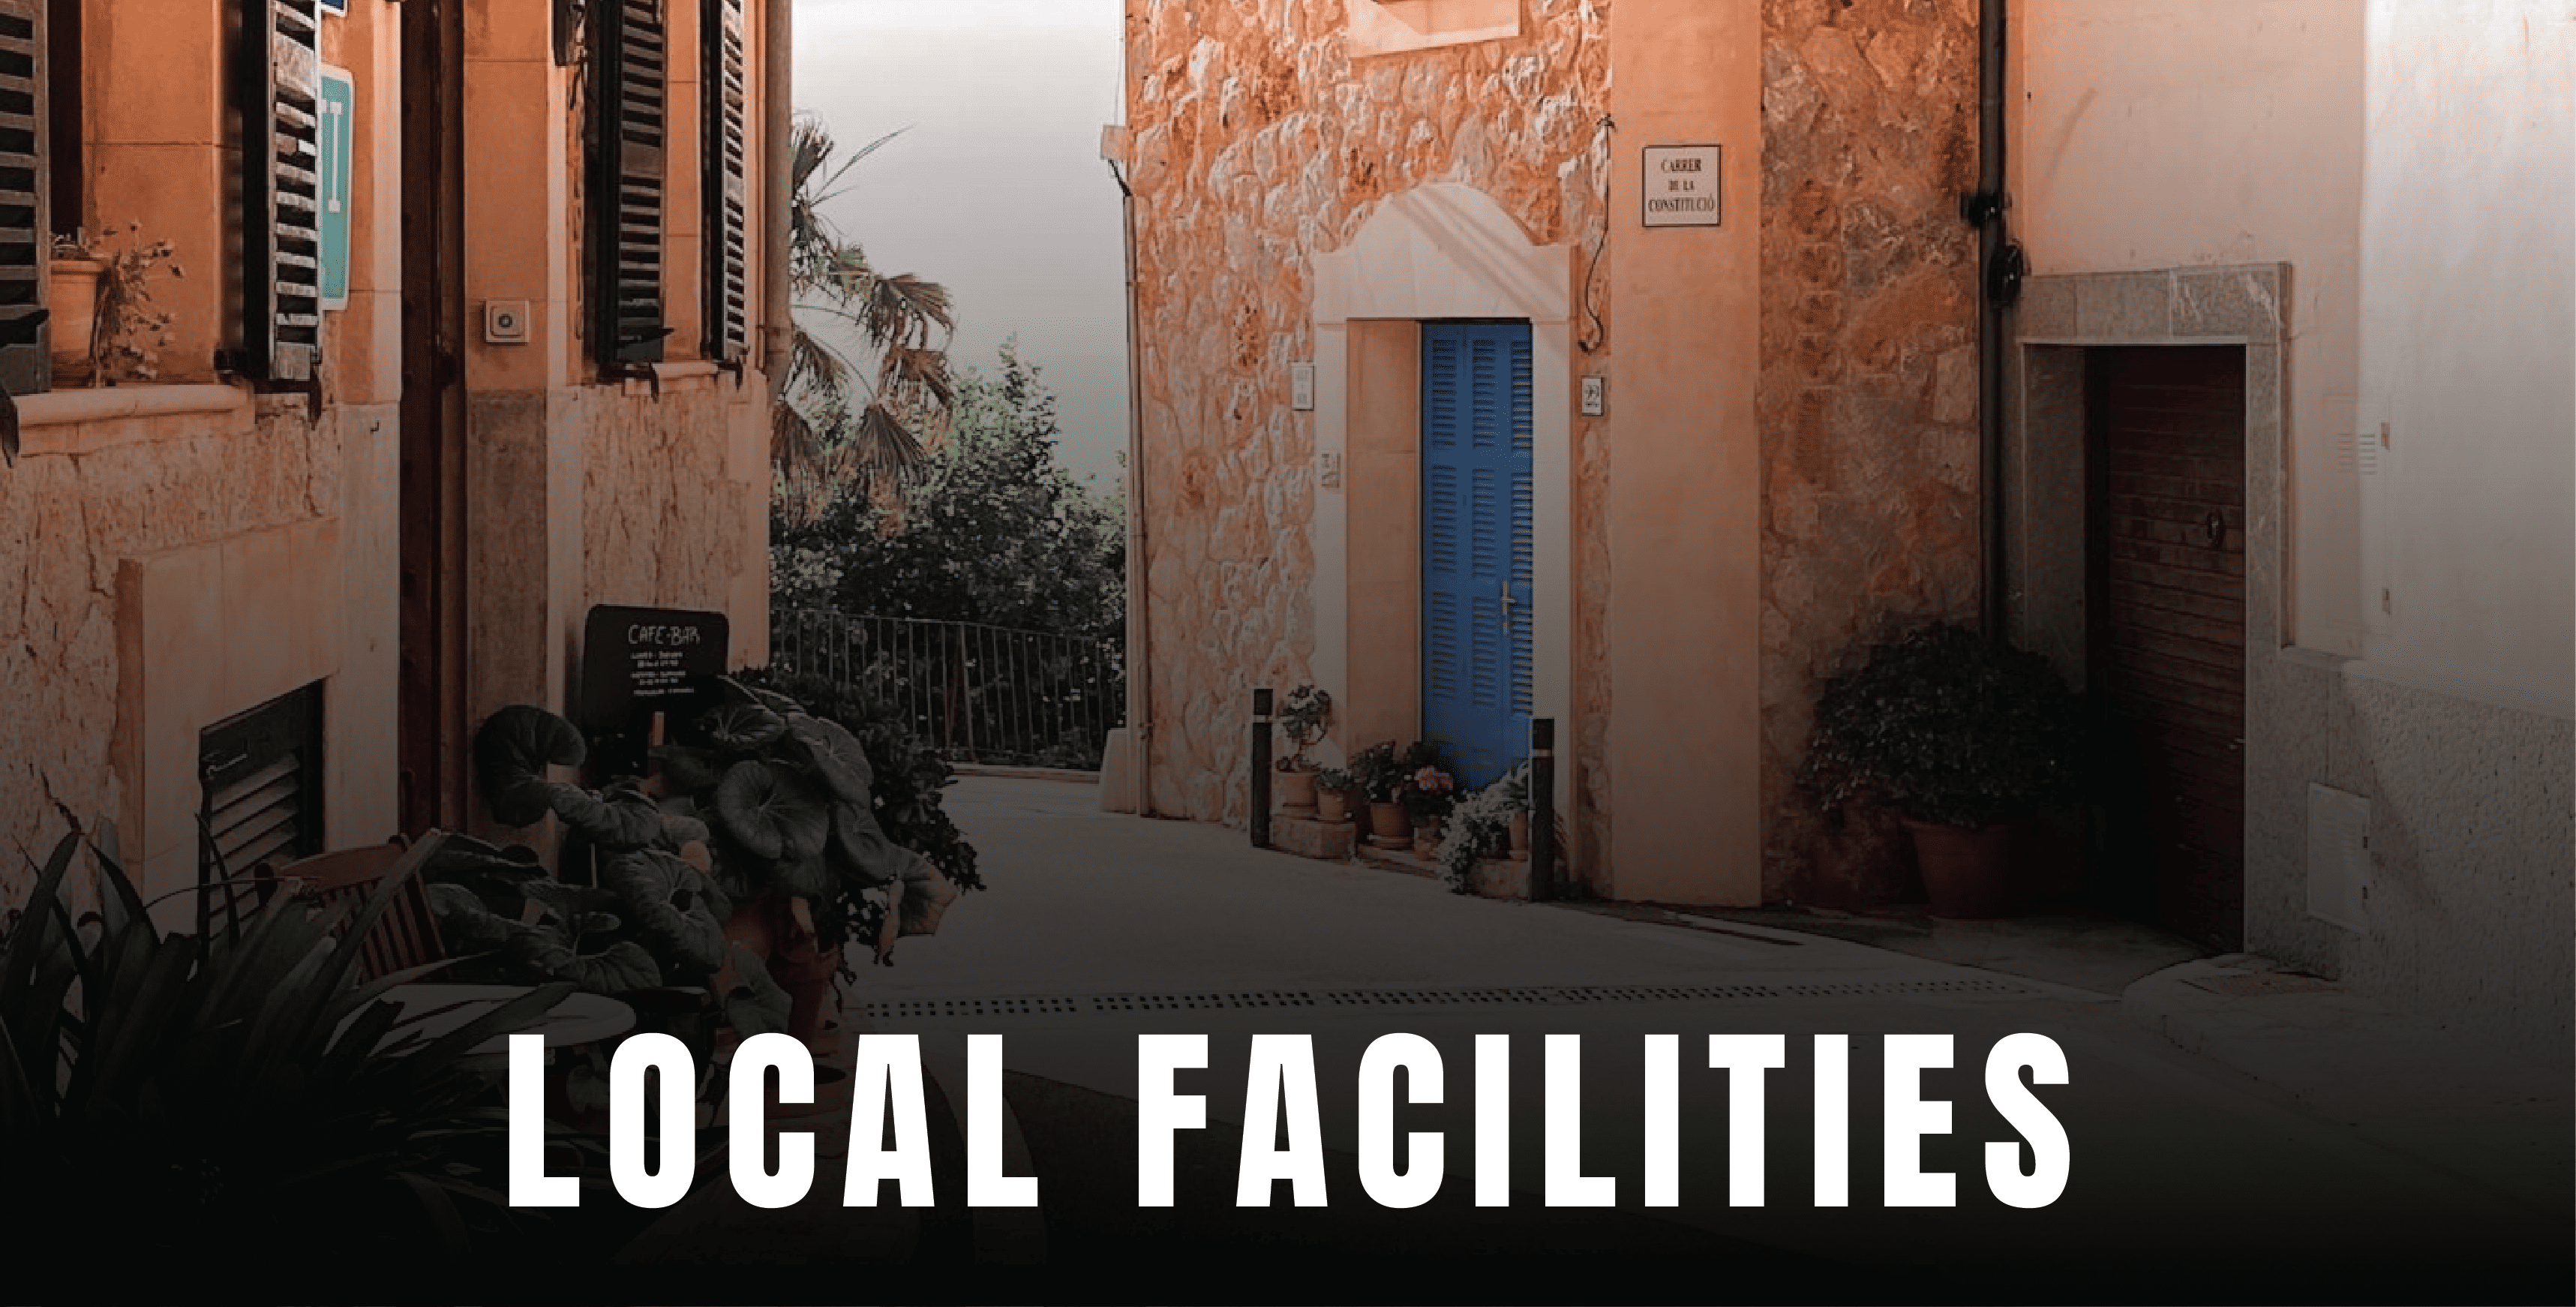 Local facilities and amenities